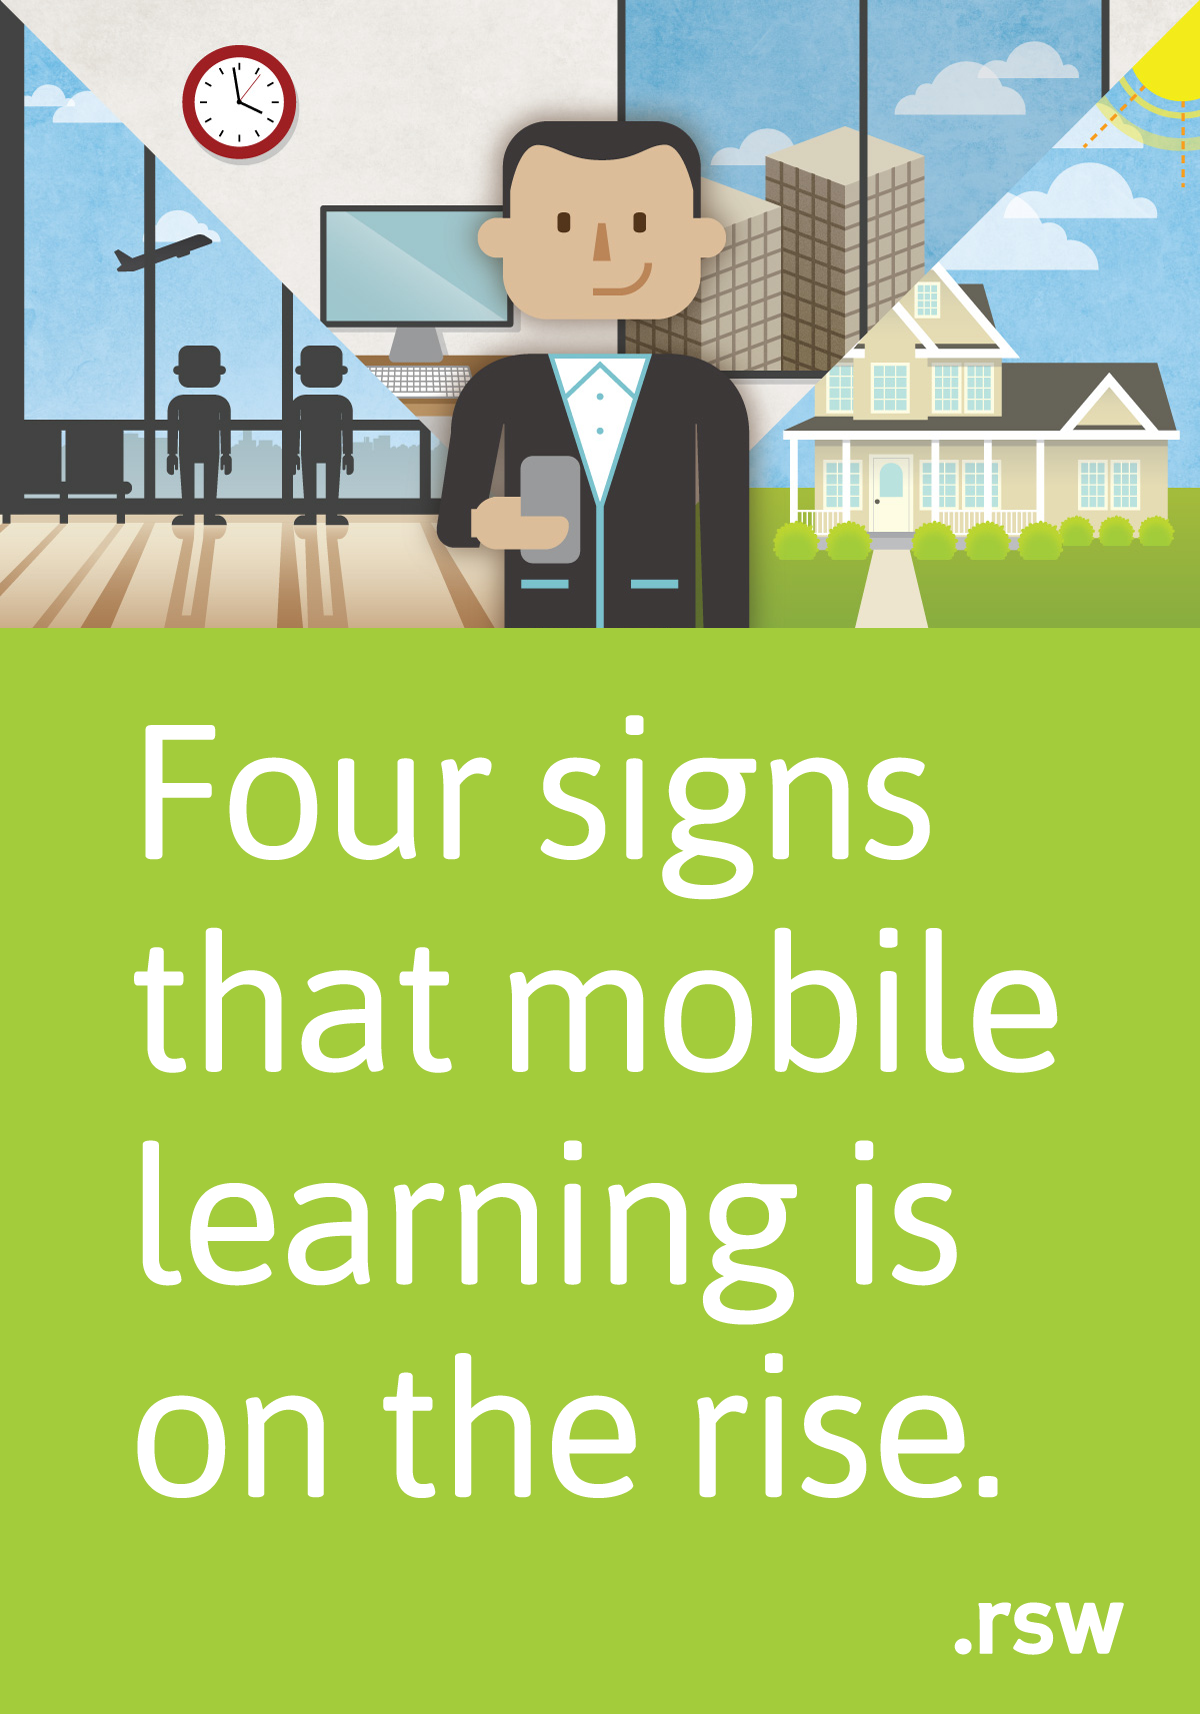 Four signs that mobile learning is on the rise - Pinterest